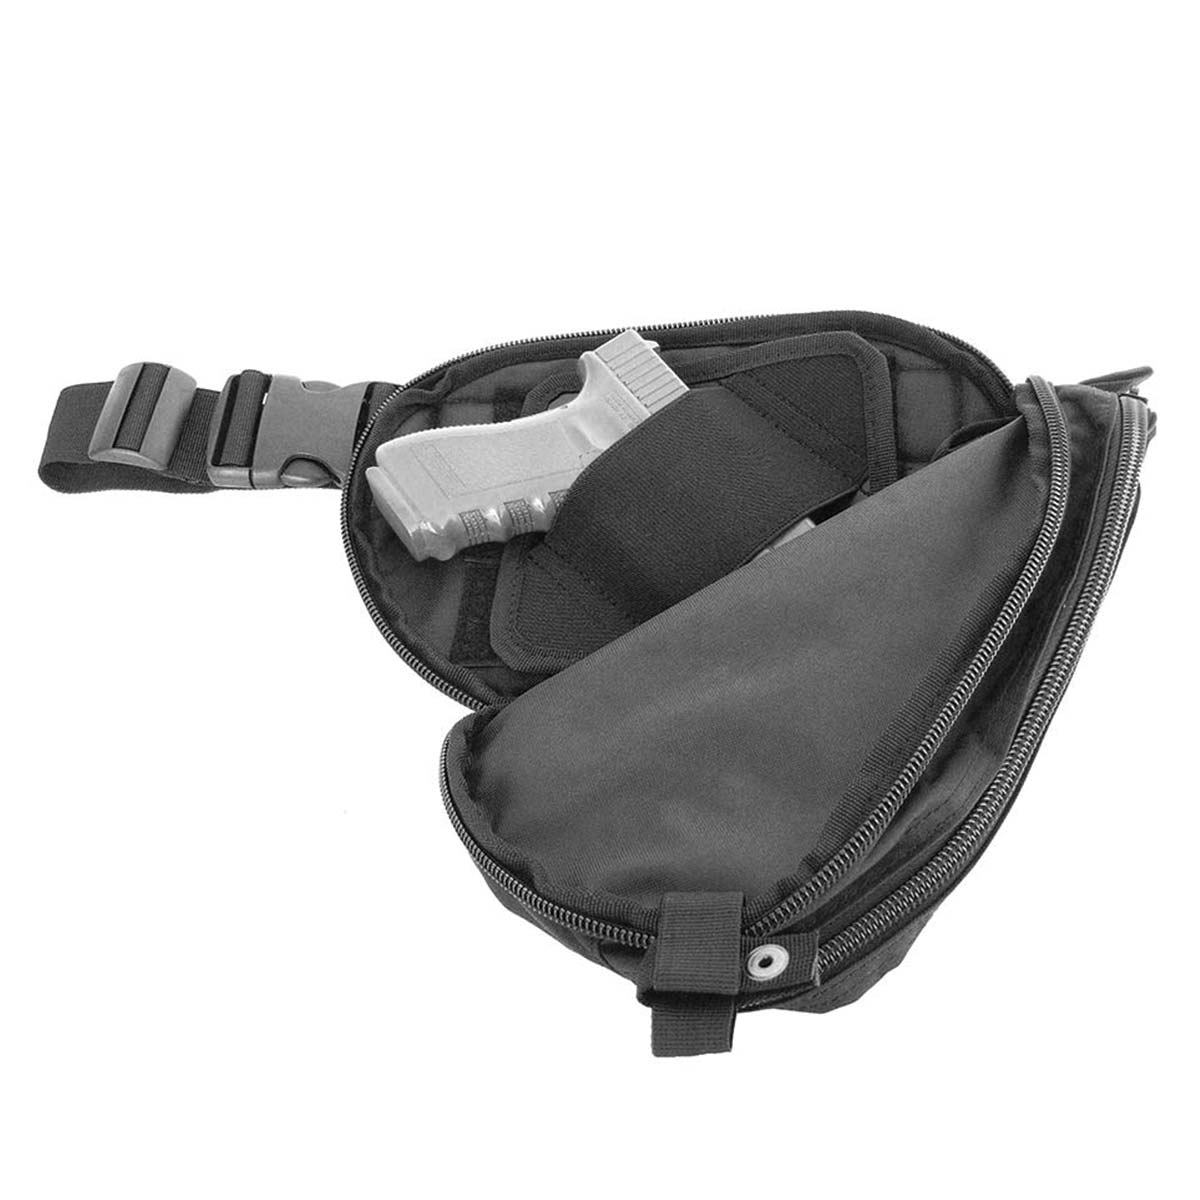  WOLF TACTICAL Fanny Pack, Dangler Pouch Concealed Carry Men  CCW Fanny Pack For Men Drop Pouch Waist Pack : Sports & Outdoors